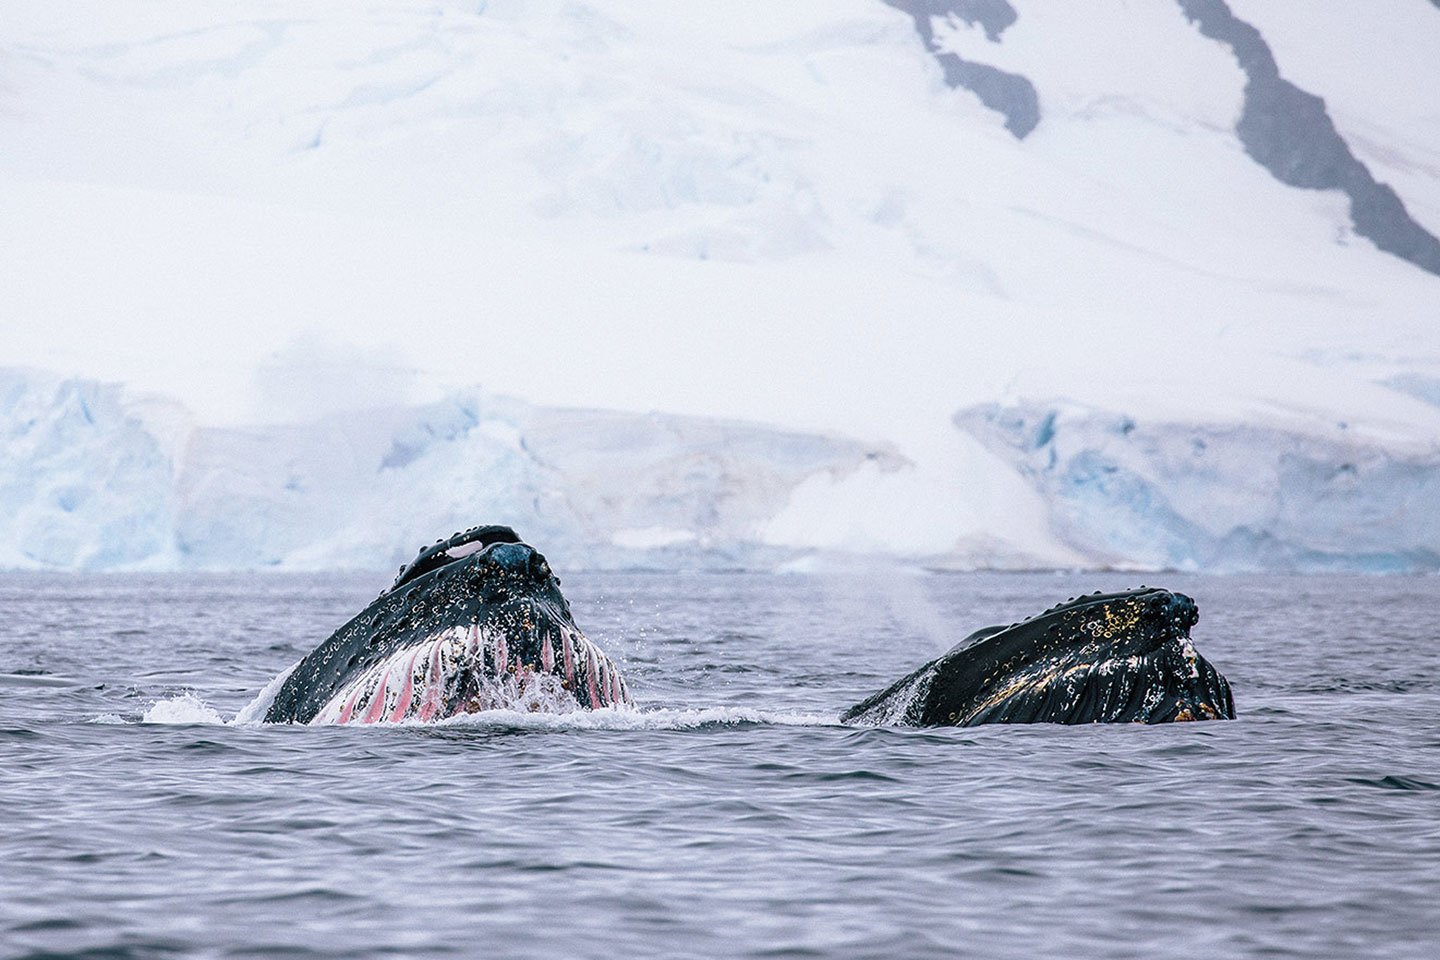 Humpback whales in the Arctic